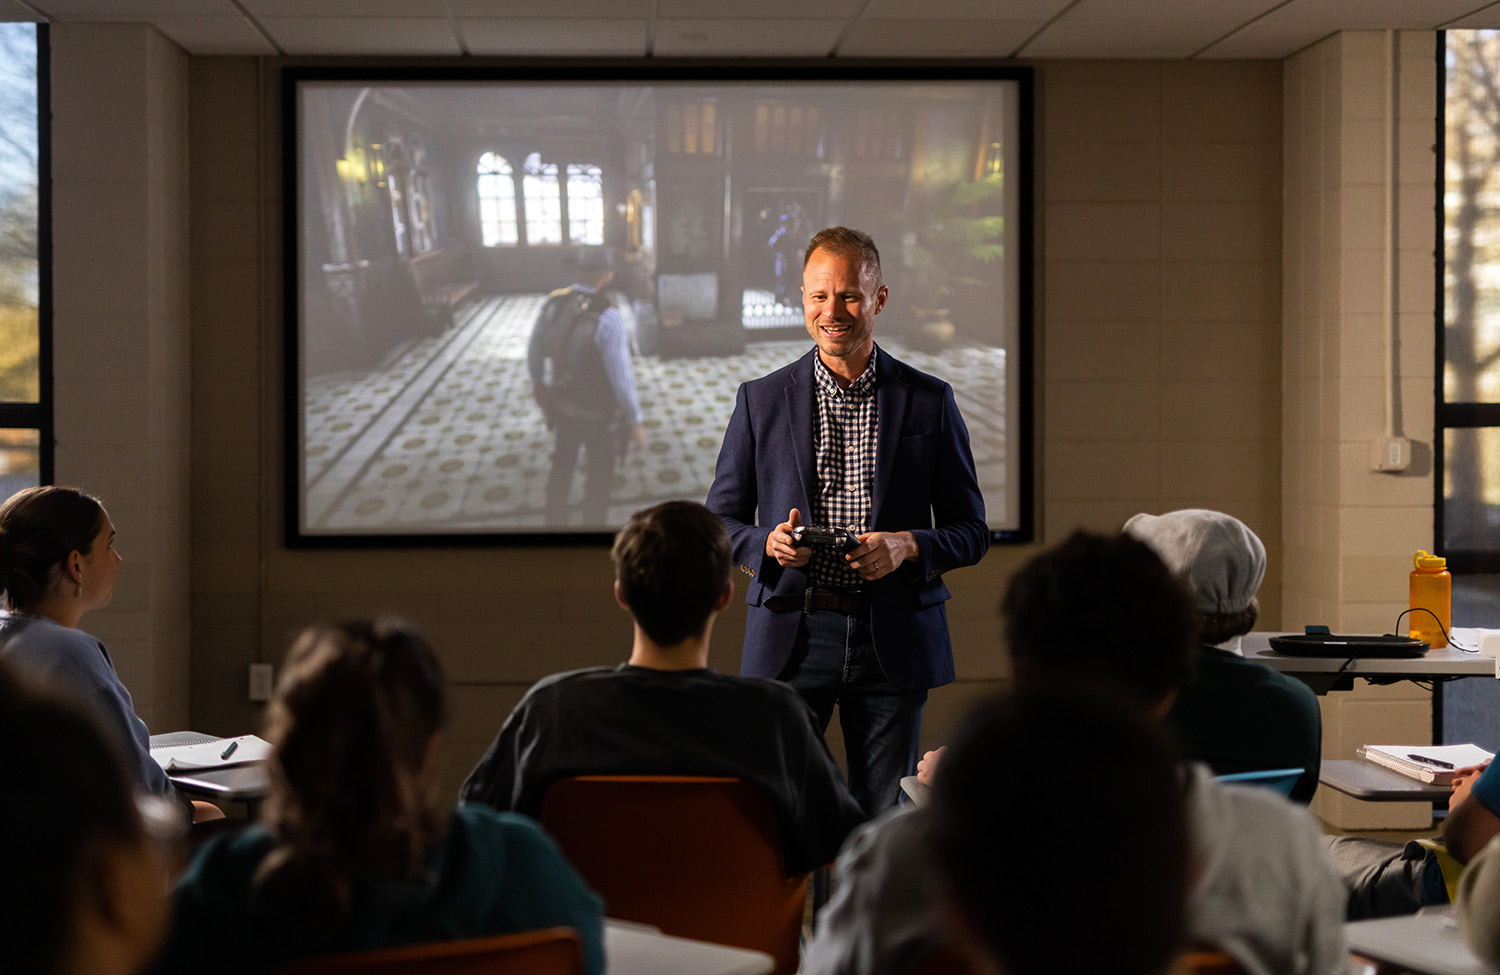 Tore Olsson stands in front of a screen displaying a scene from the game Red Dead Redemption II with a classroom of students observing.